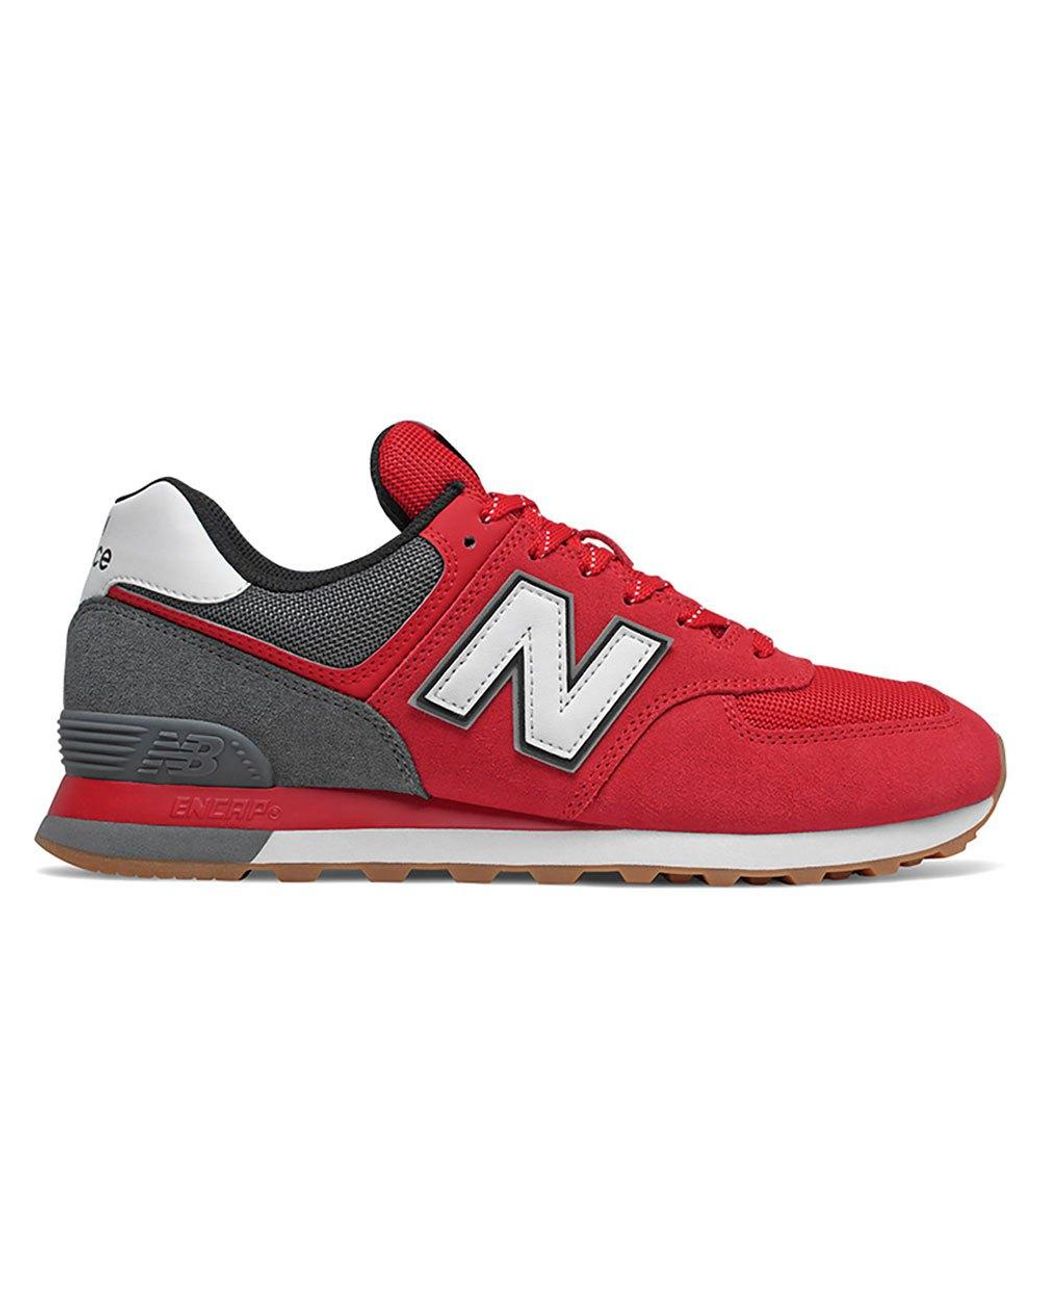 New Balance Suede 574 V2 in Red|Grey (Red) for Men - Lyst